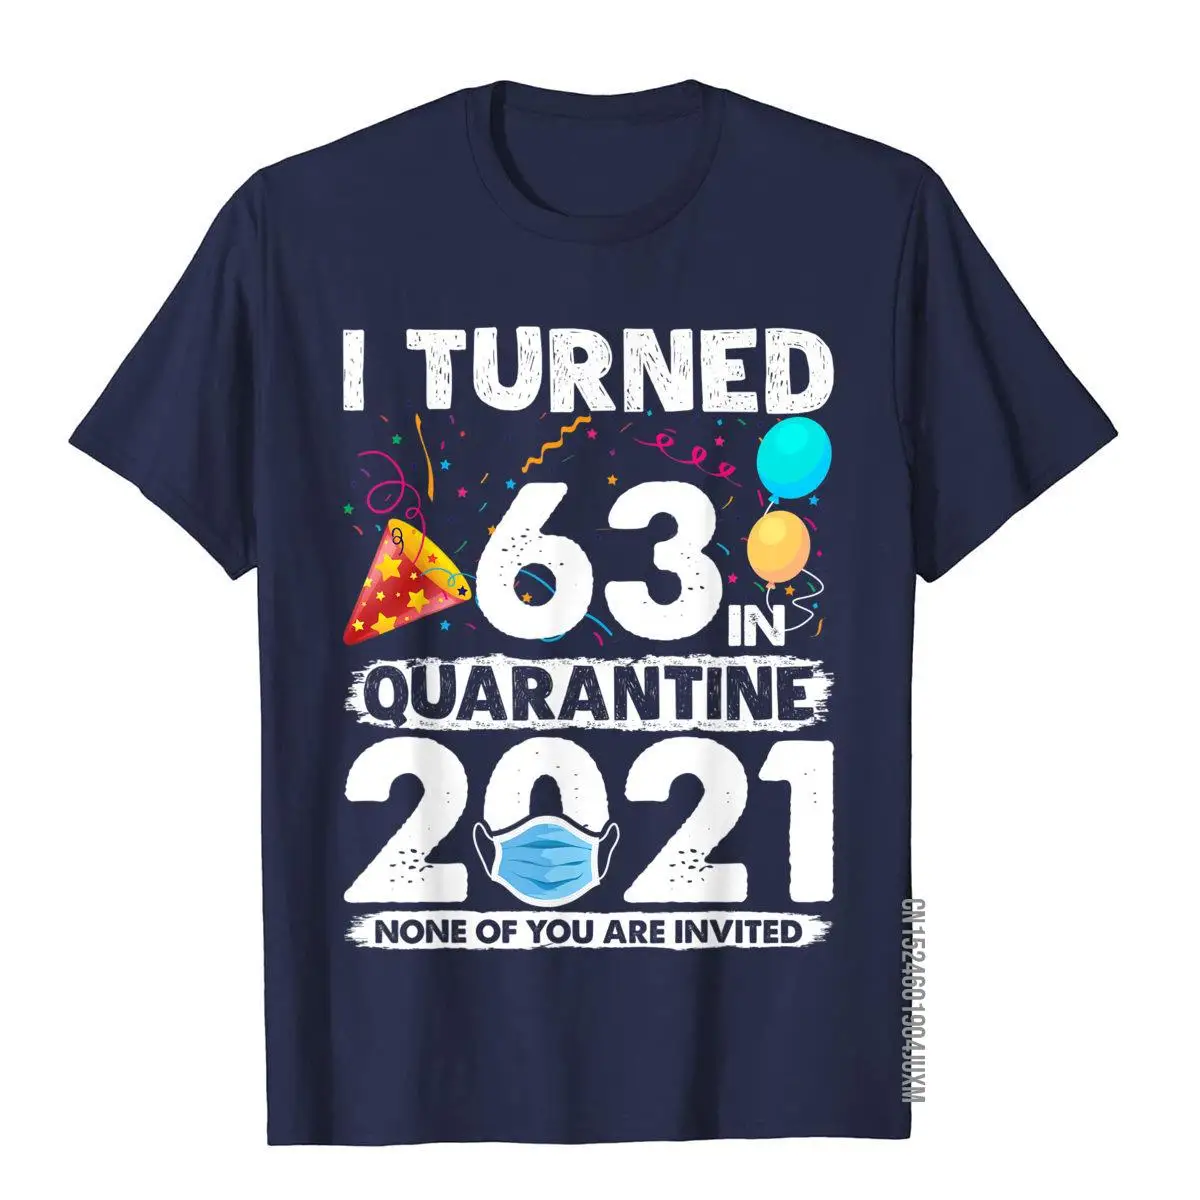 I Turned 63 In Quarantine 2021 Funny 63rd Birthday Gift T-Shirt__97A215navy